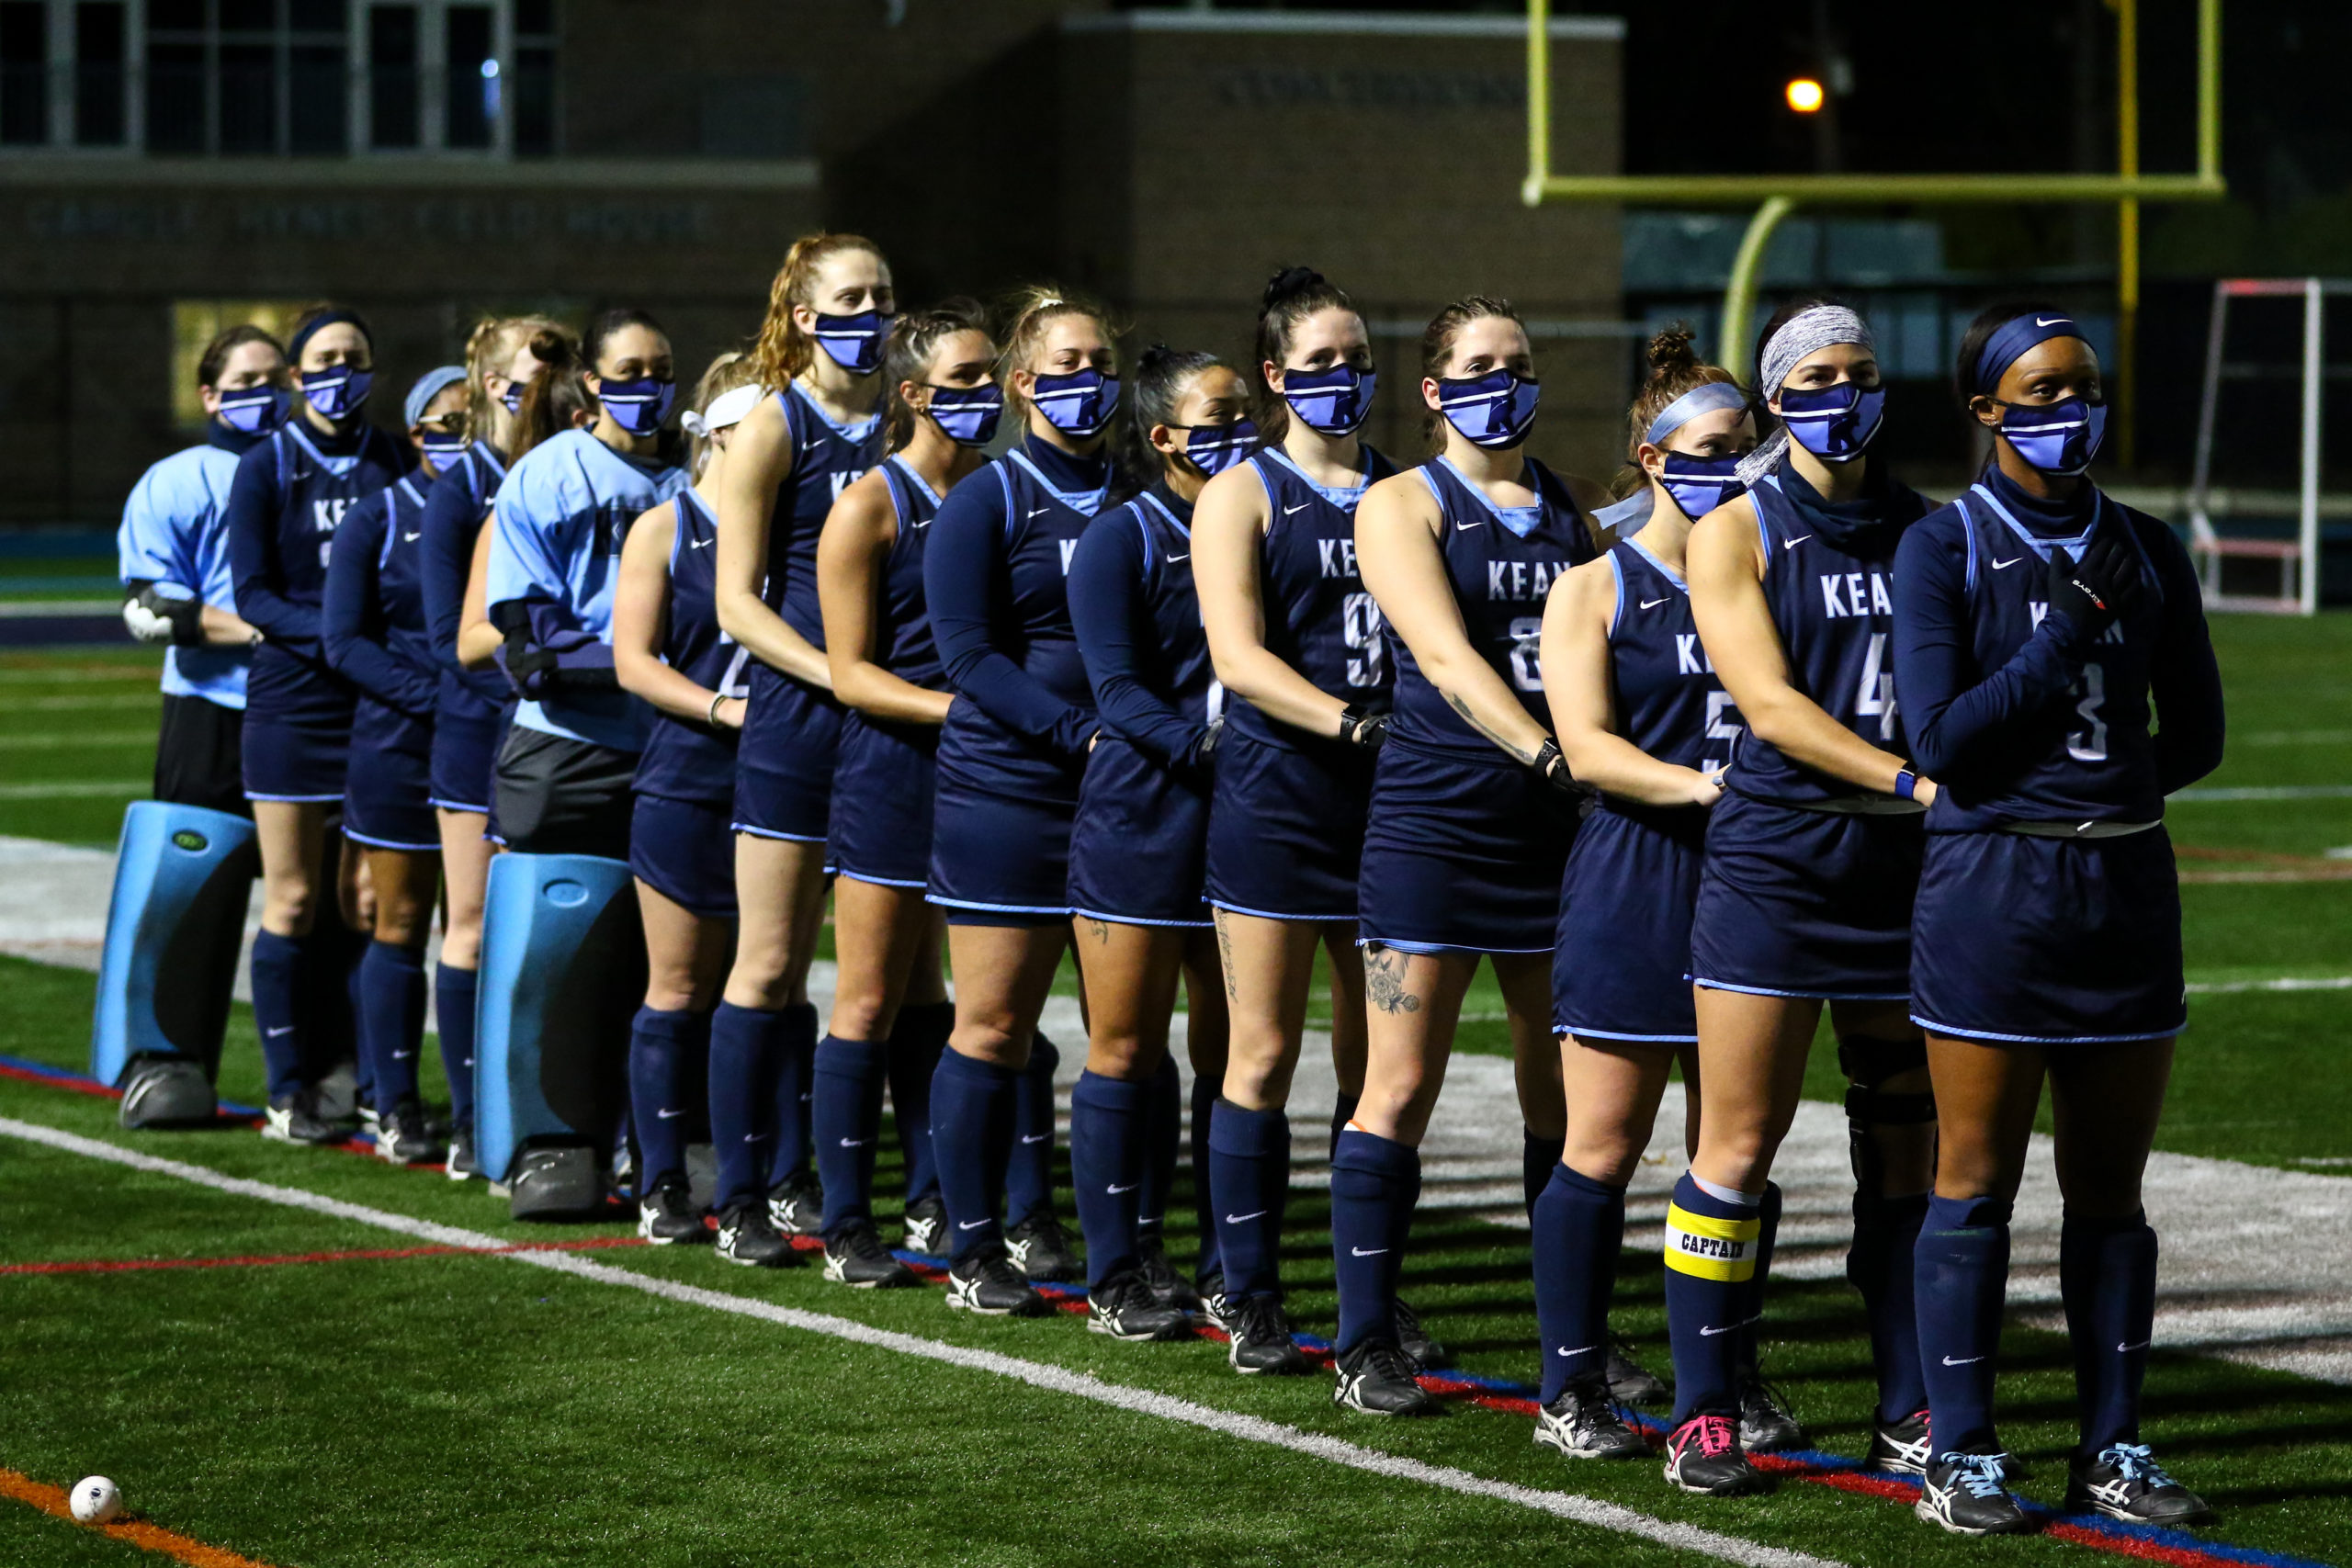 The Kean University field hockey team lined up at at the start of a game in dark blue uniforms and dark blue face masks.